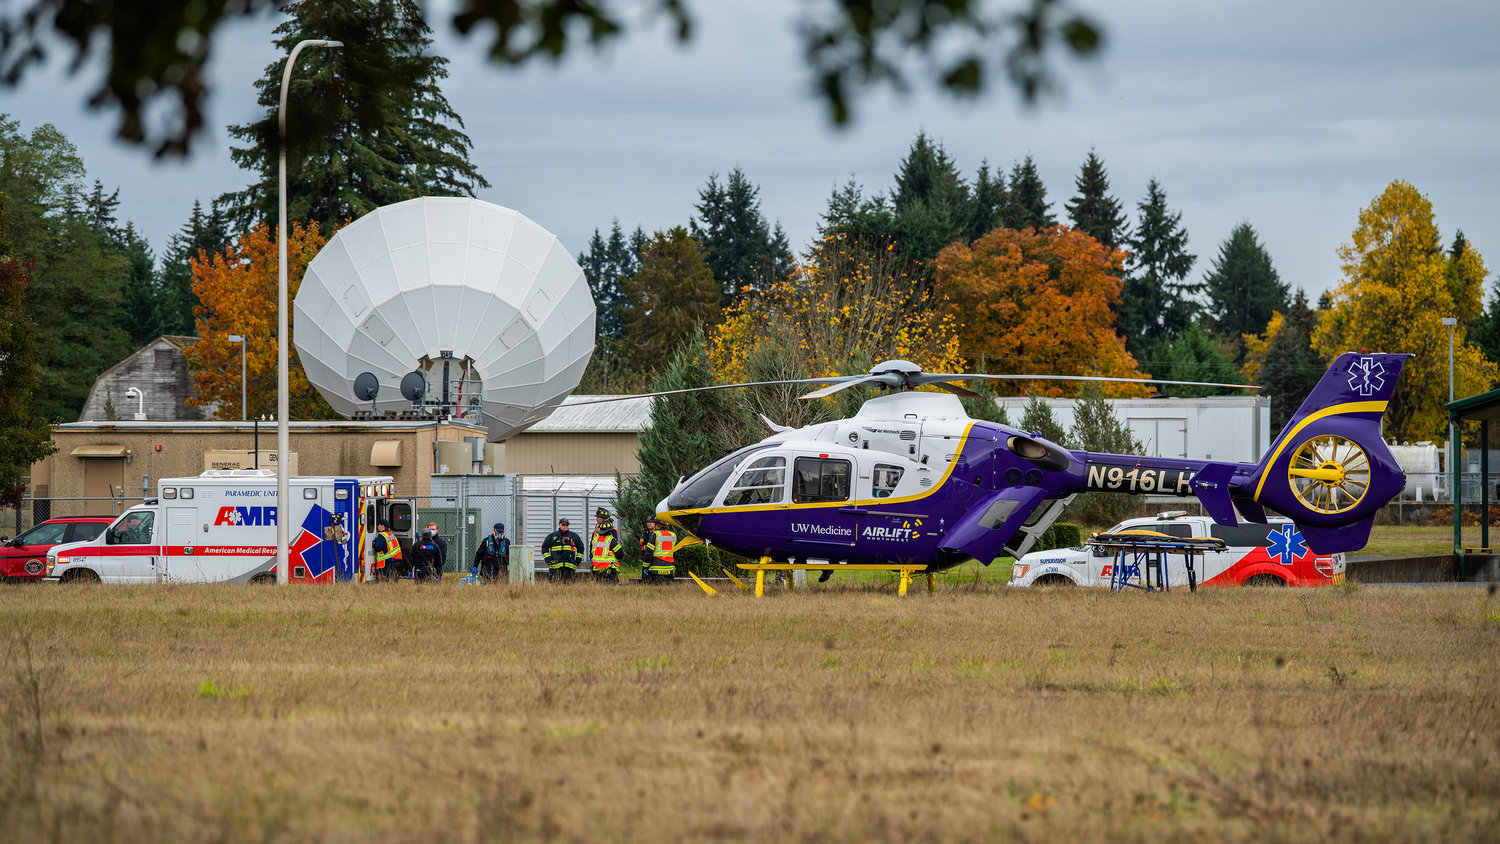 First responders are seen along Steelhammer Lane in Centralia as an Airlift Northwest helicopter lands to pick up a trauma patient before flying to Harborview Medical Center in Seattle.